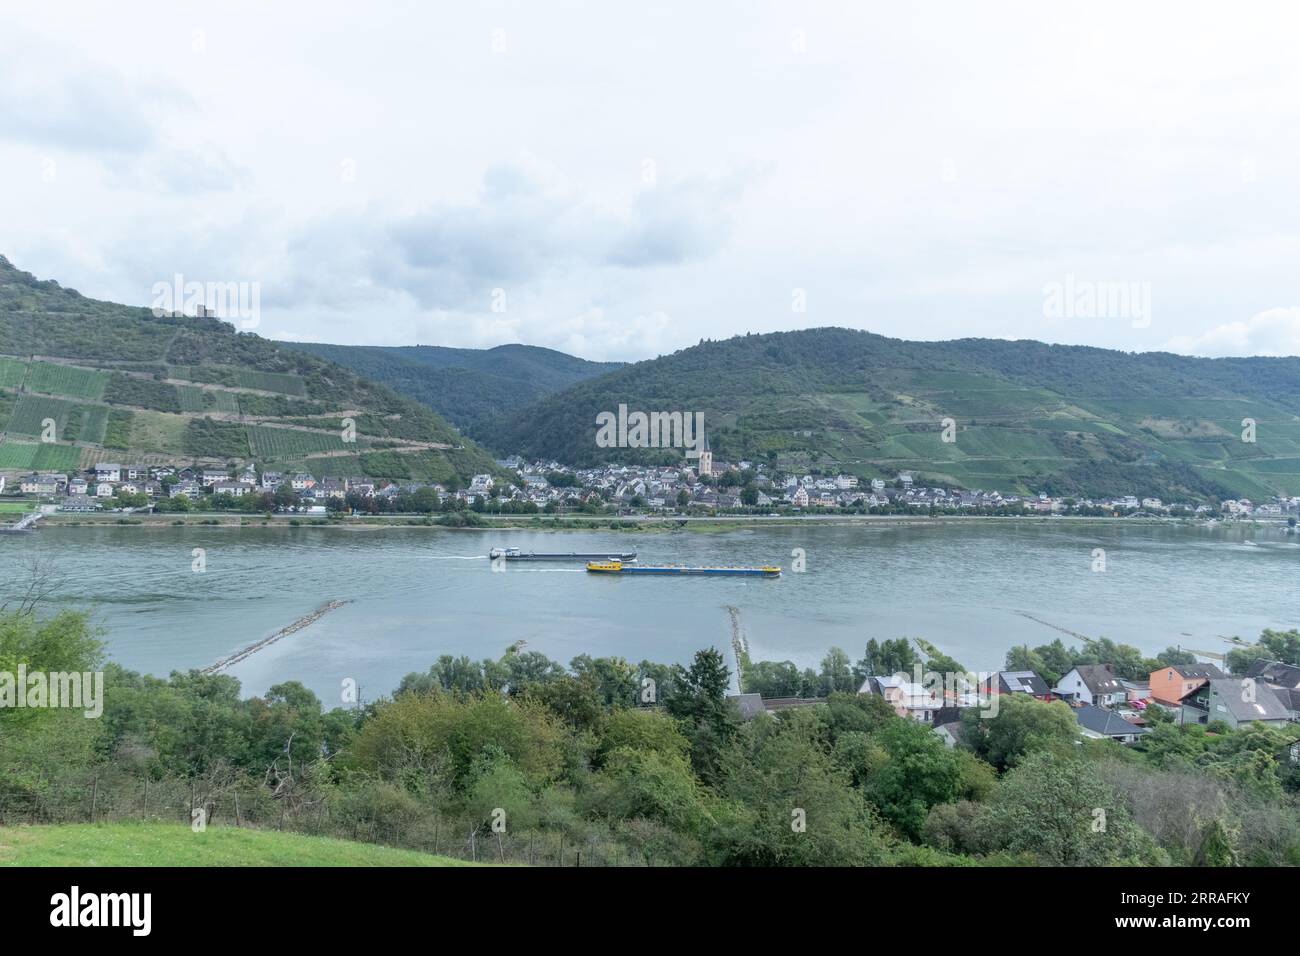 Commercial barges and other river traffic proceed along the River Rhine in the Mainz-Bingen area, Germany Stock Photo